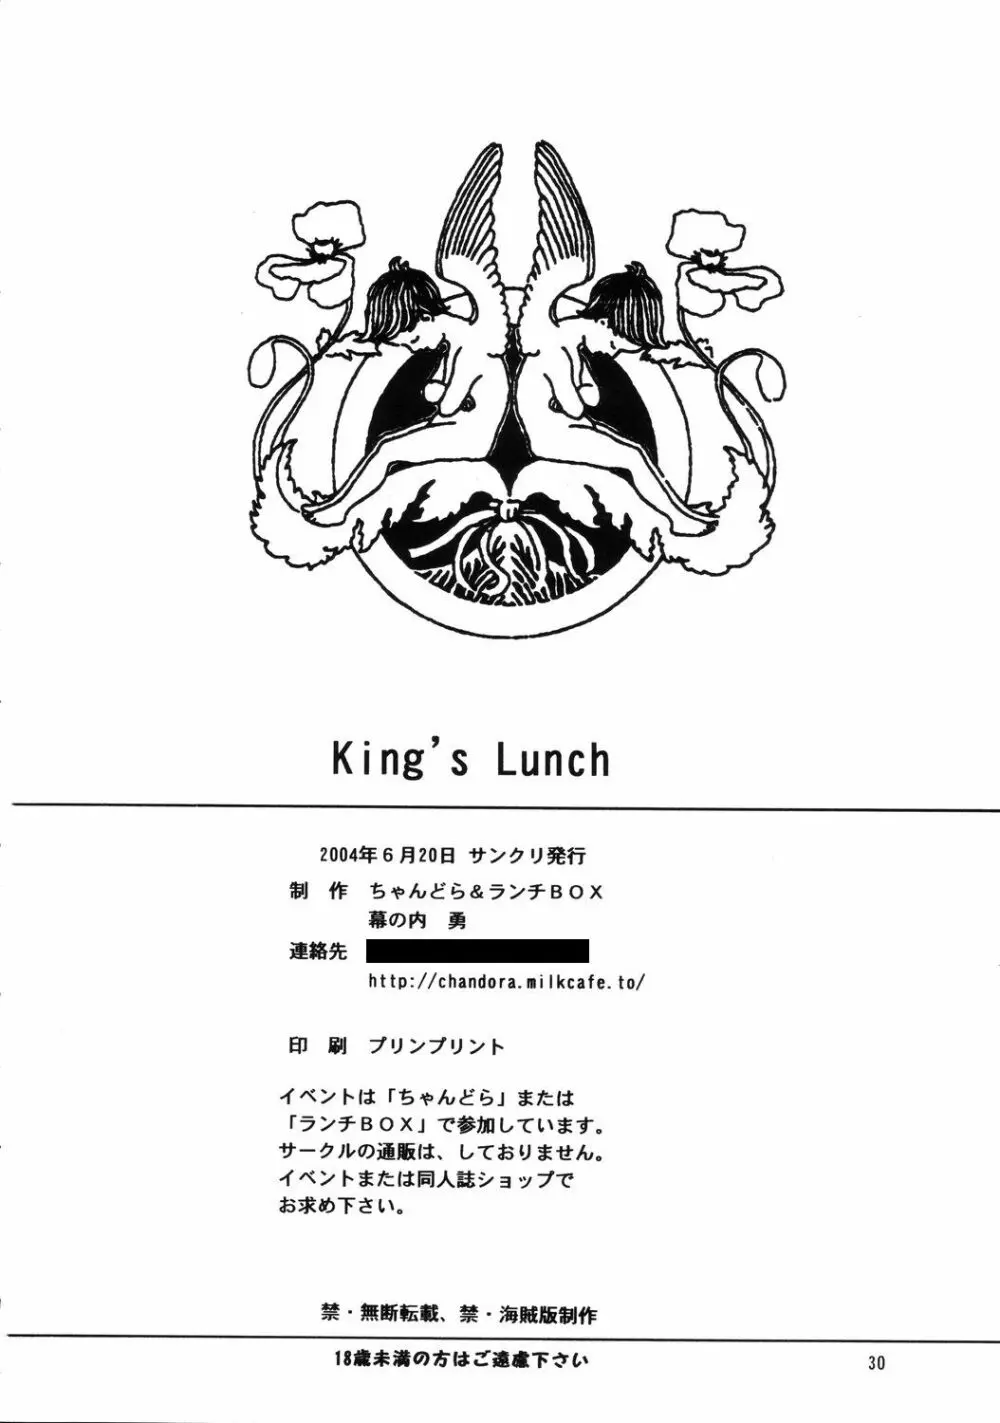 Lunch Box 62 - King's Lunch Page.29